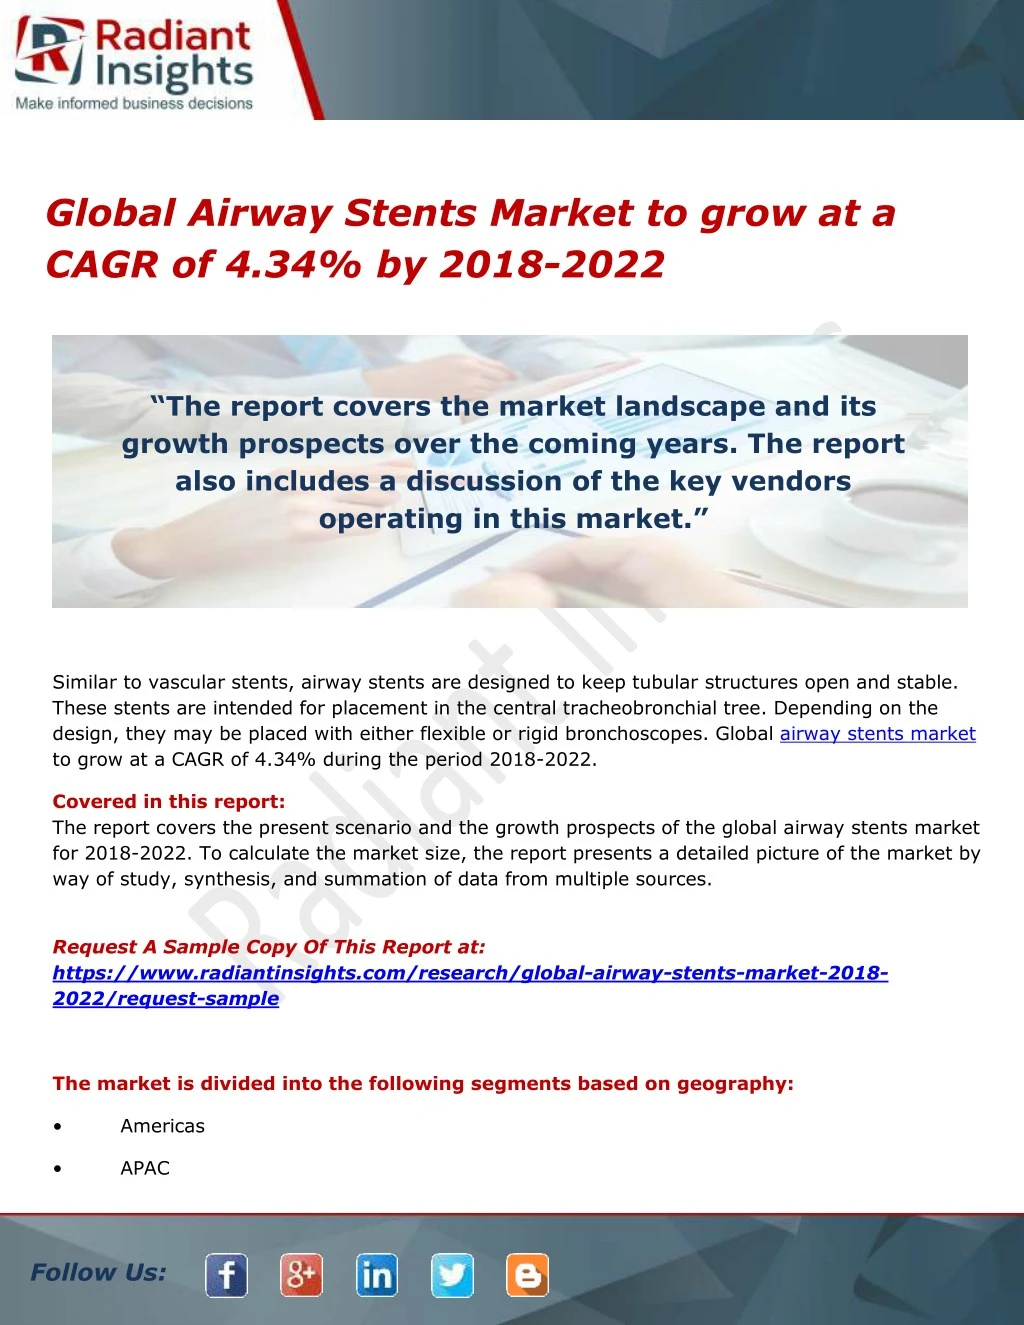 global airway stents market to grow at a cagr